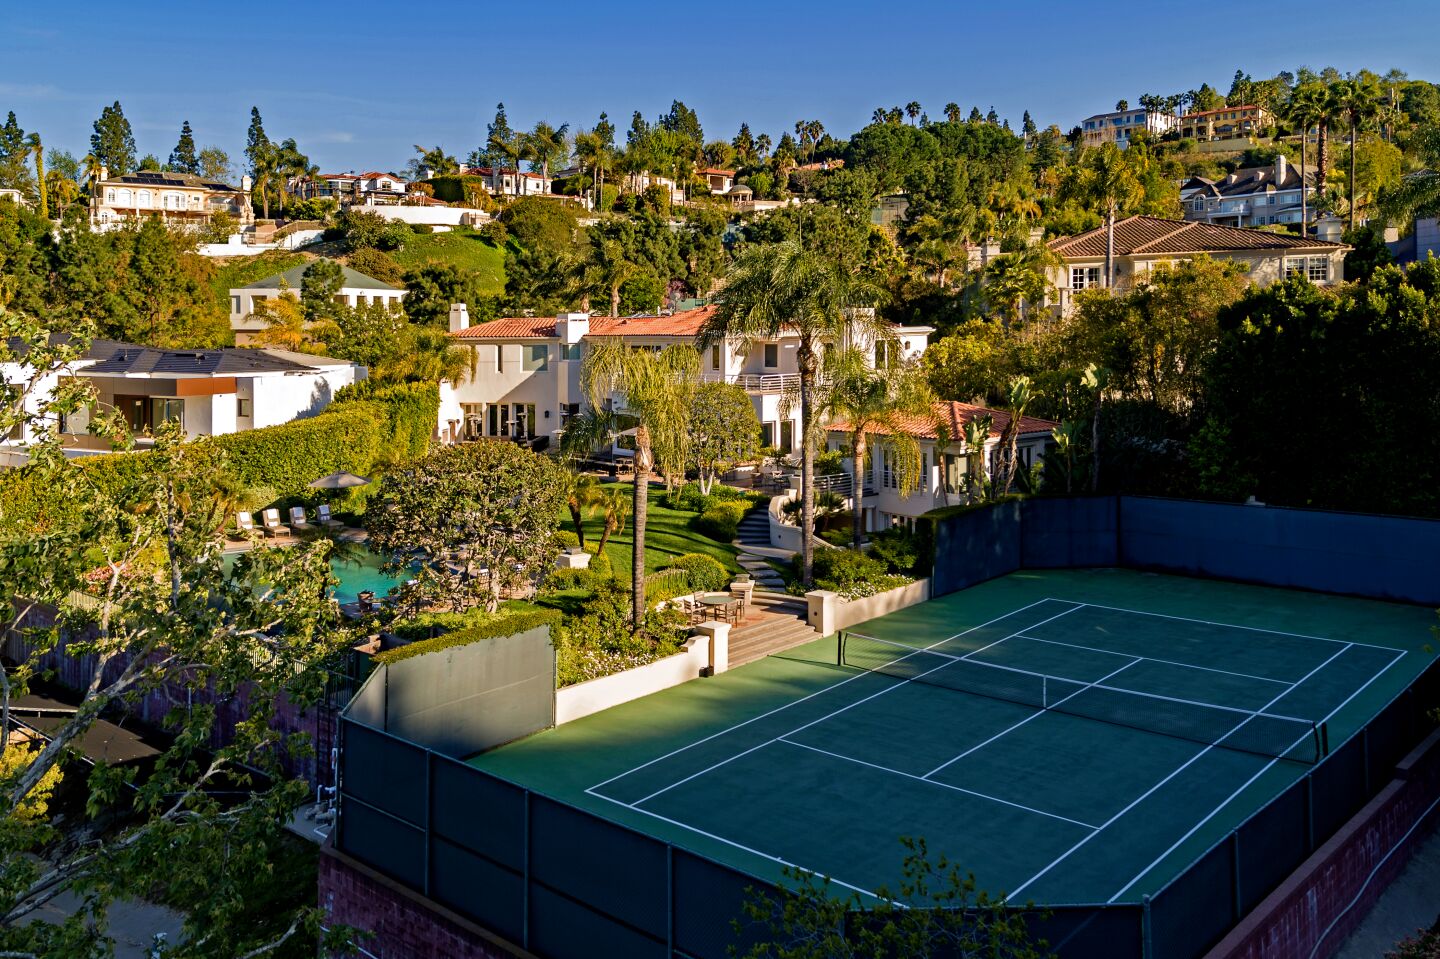 Media mogul Jules Haimovitz has listed his hillside mansion in the Beverly Hills Post Office area for $21.32 million.